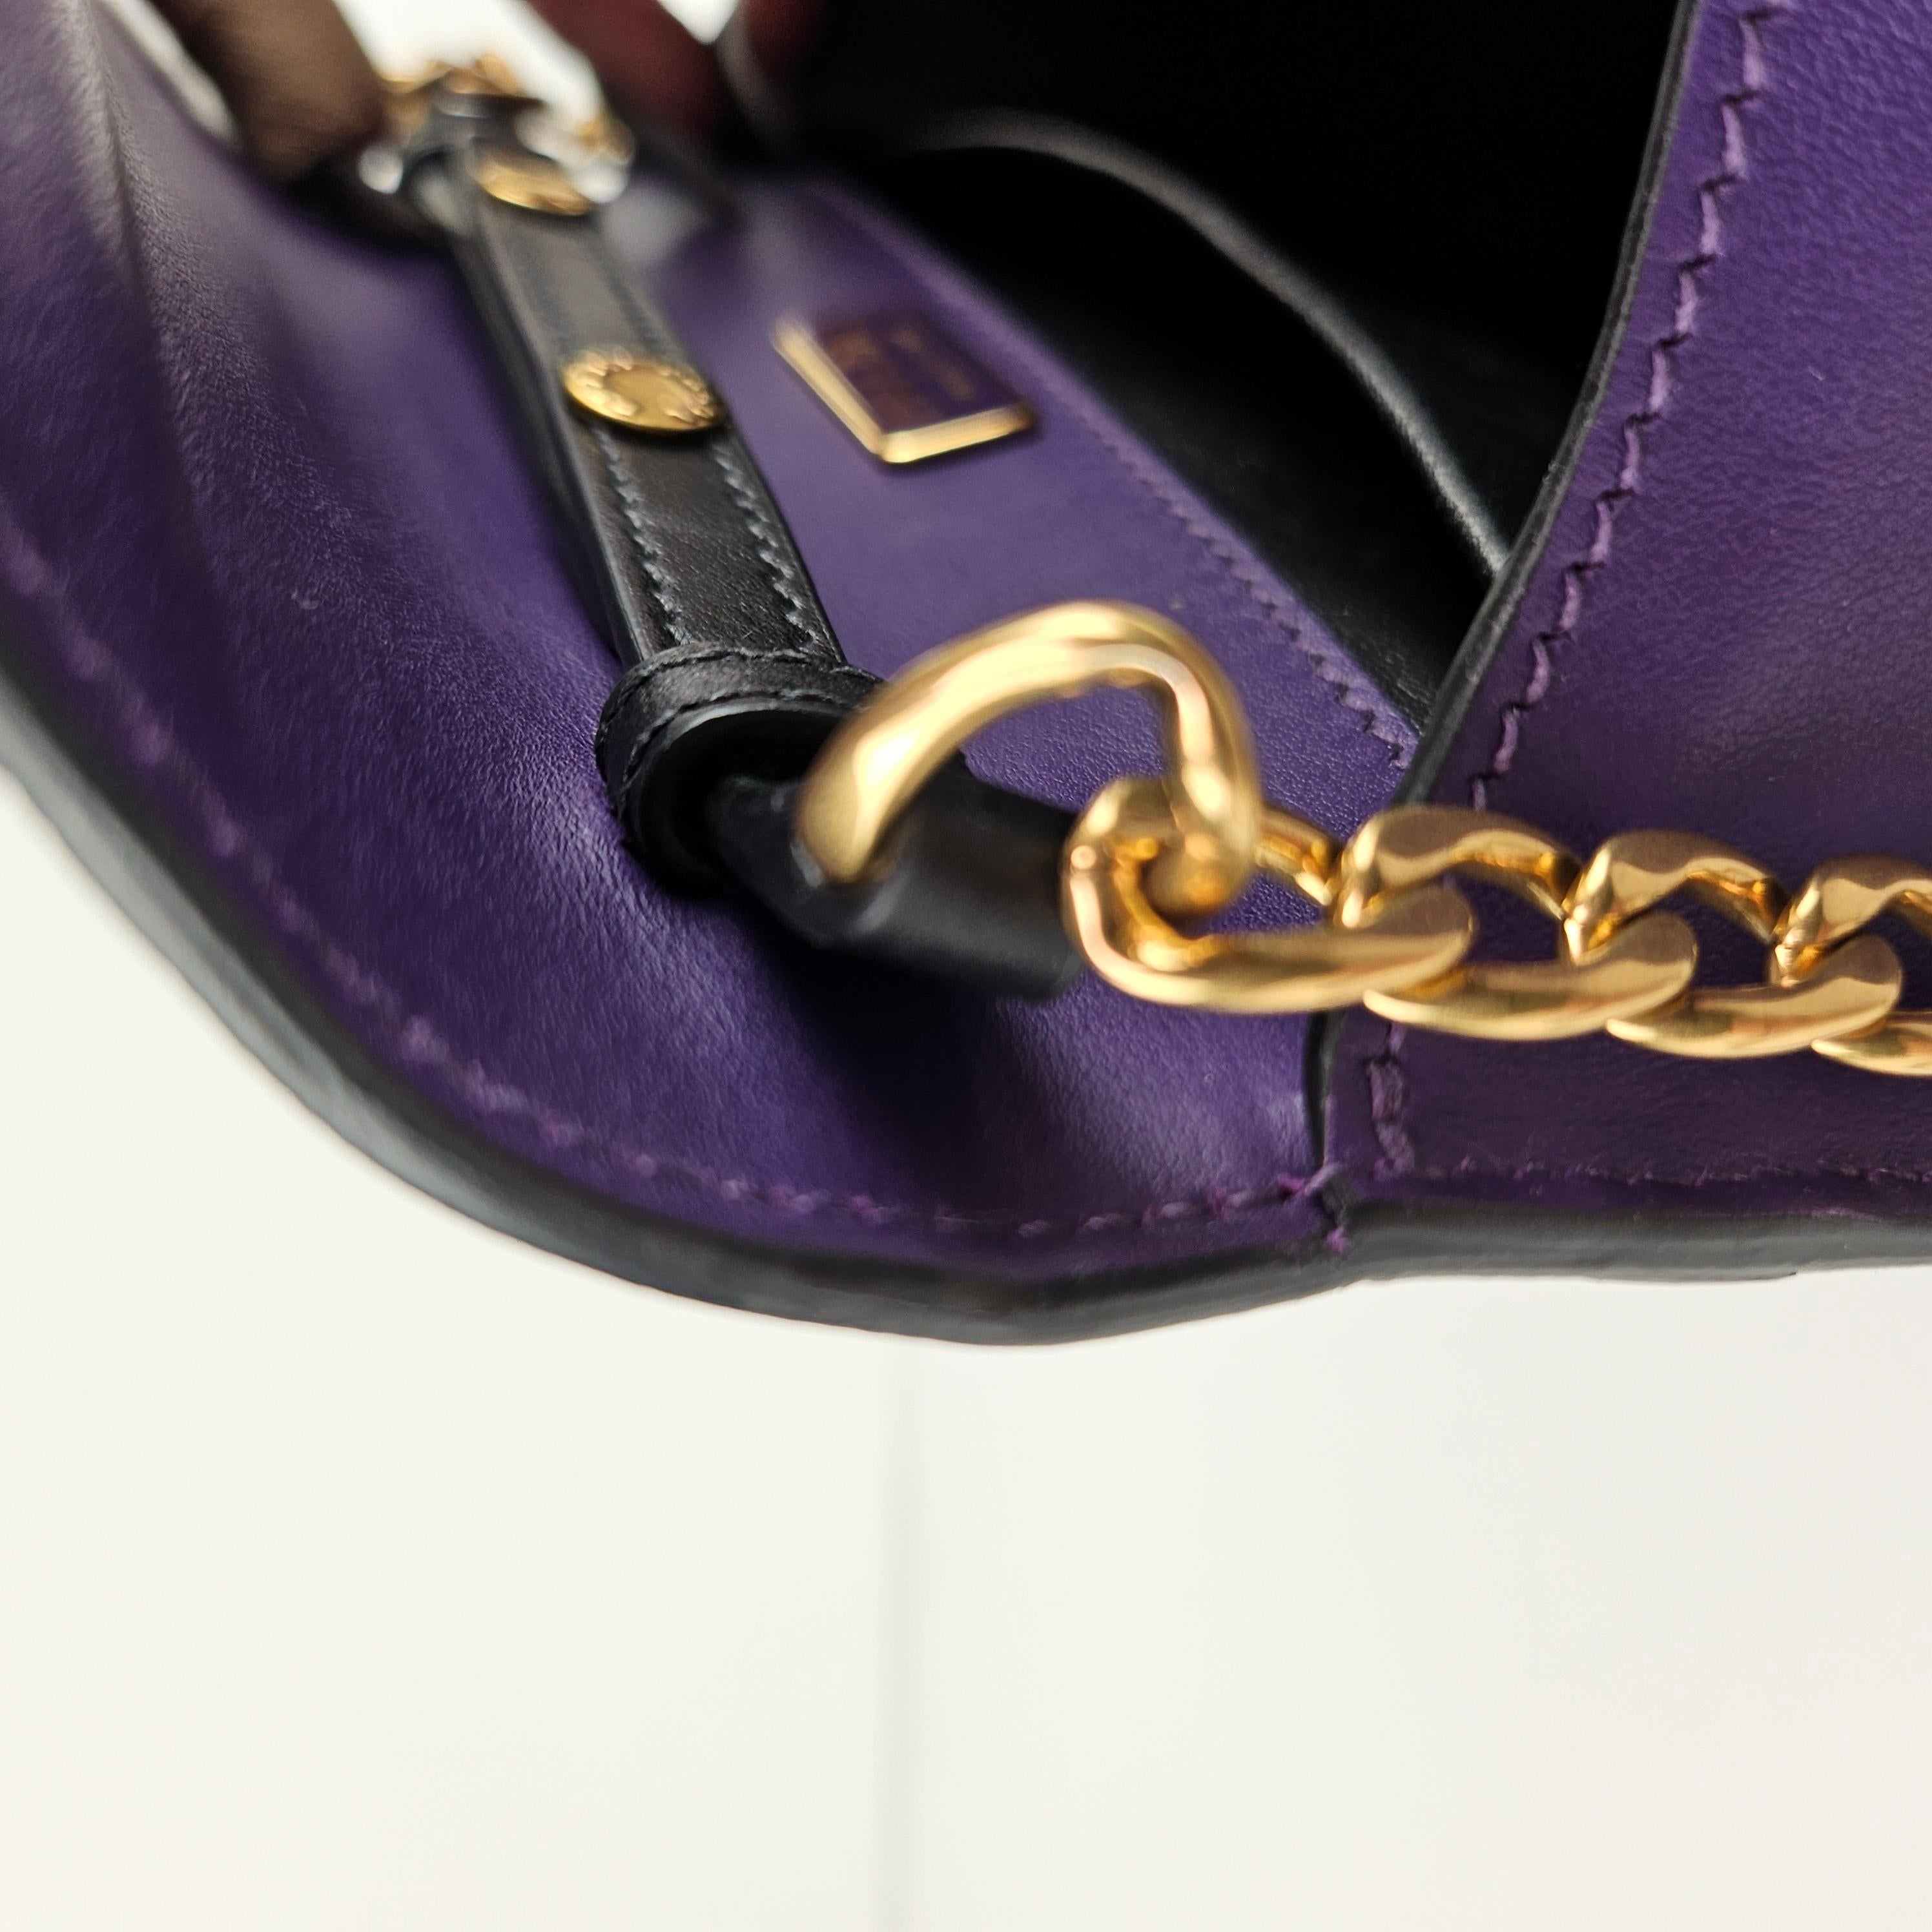 Prada Small Leather Purple Astrology Cahier Crossbody Bag In Excellent Condition For Sale In Denver, CO